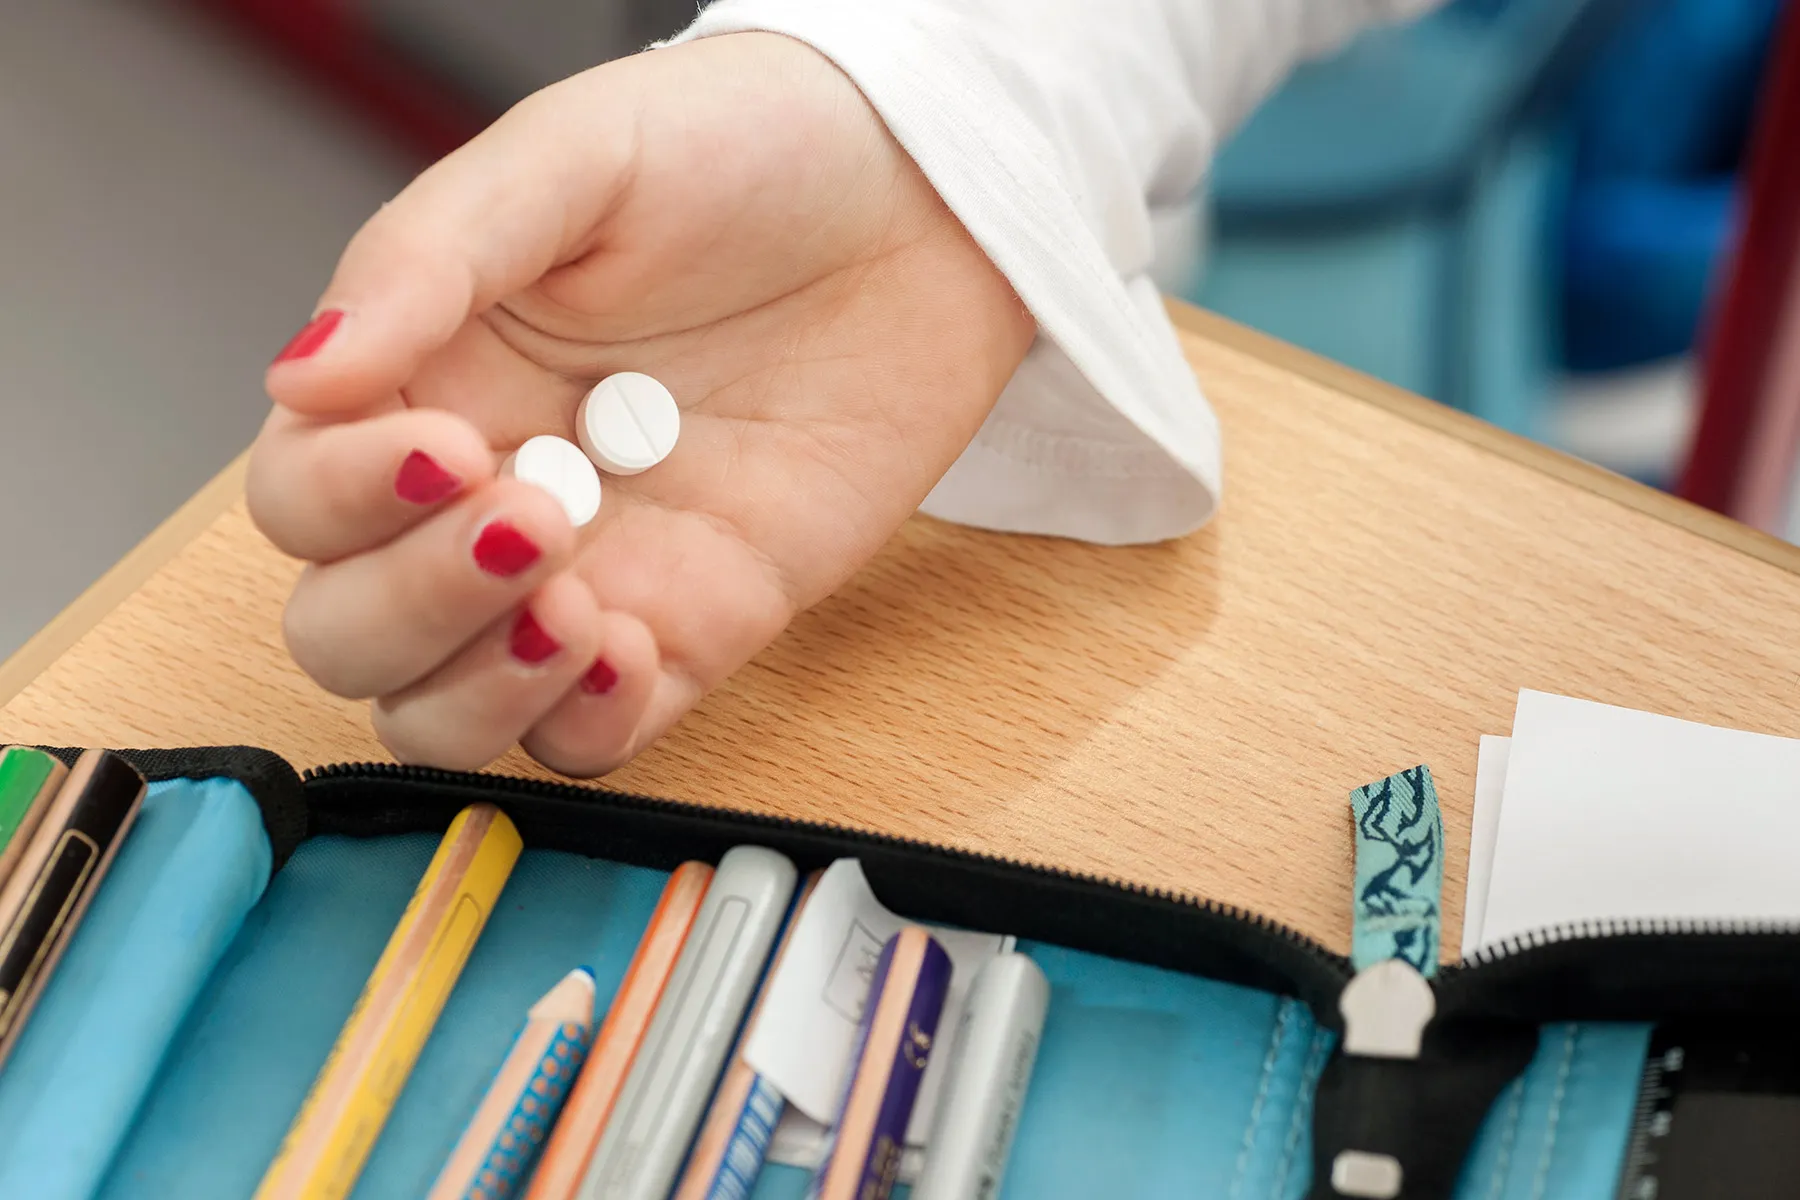 photo of child in school holding pills in hand